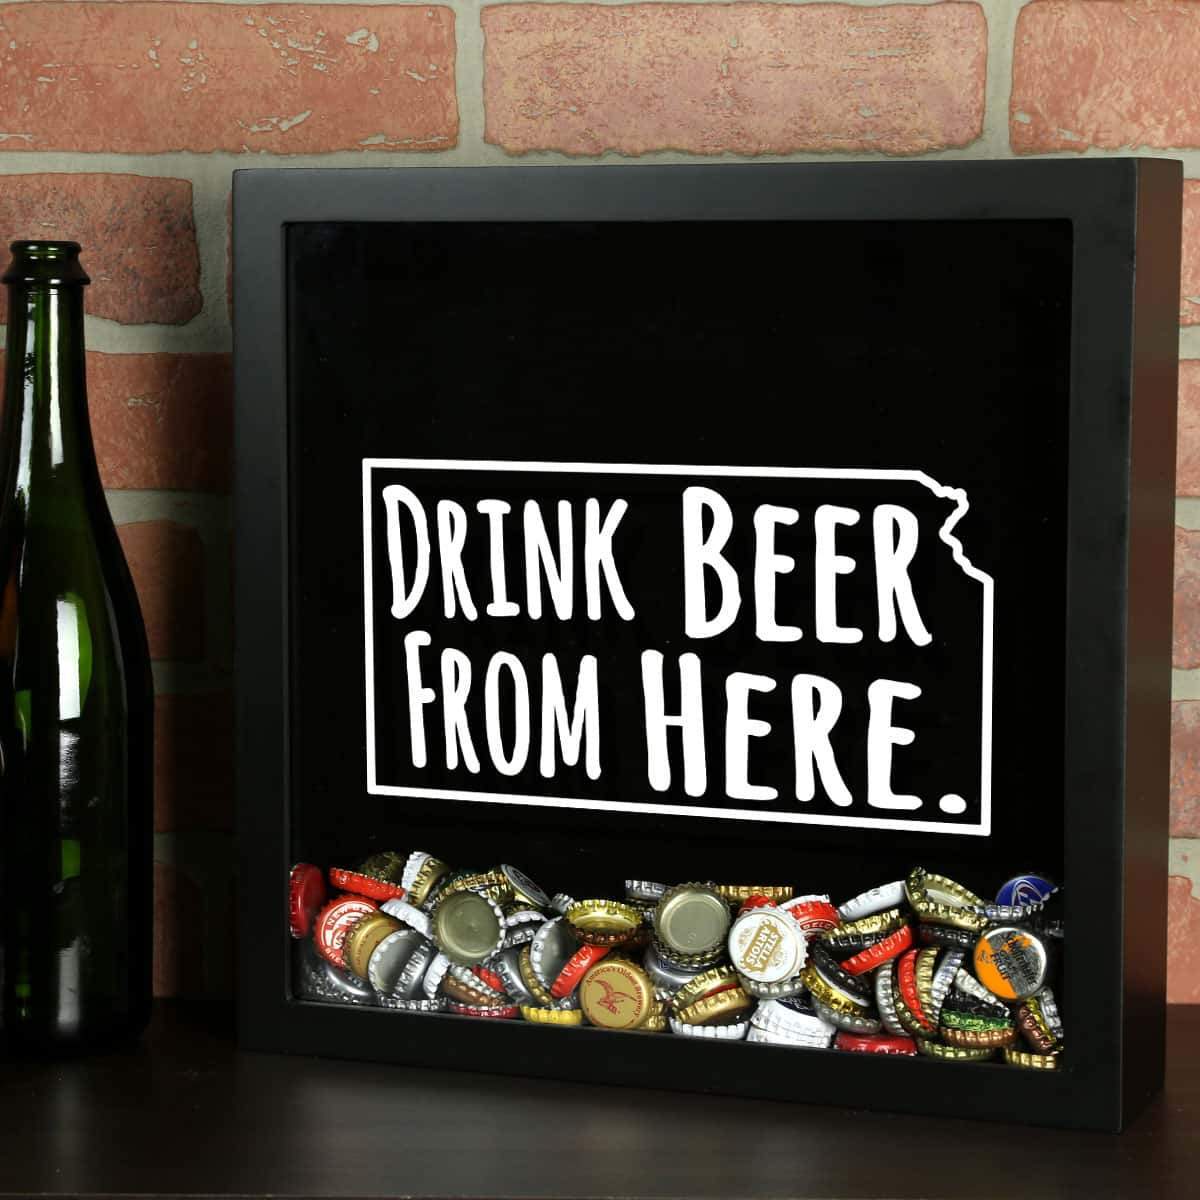 Torched Products Shadow Box Black Kansas Drink Beer From Here Beer Cap Shadow Box (781175488629)